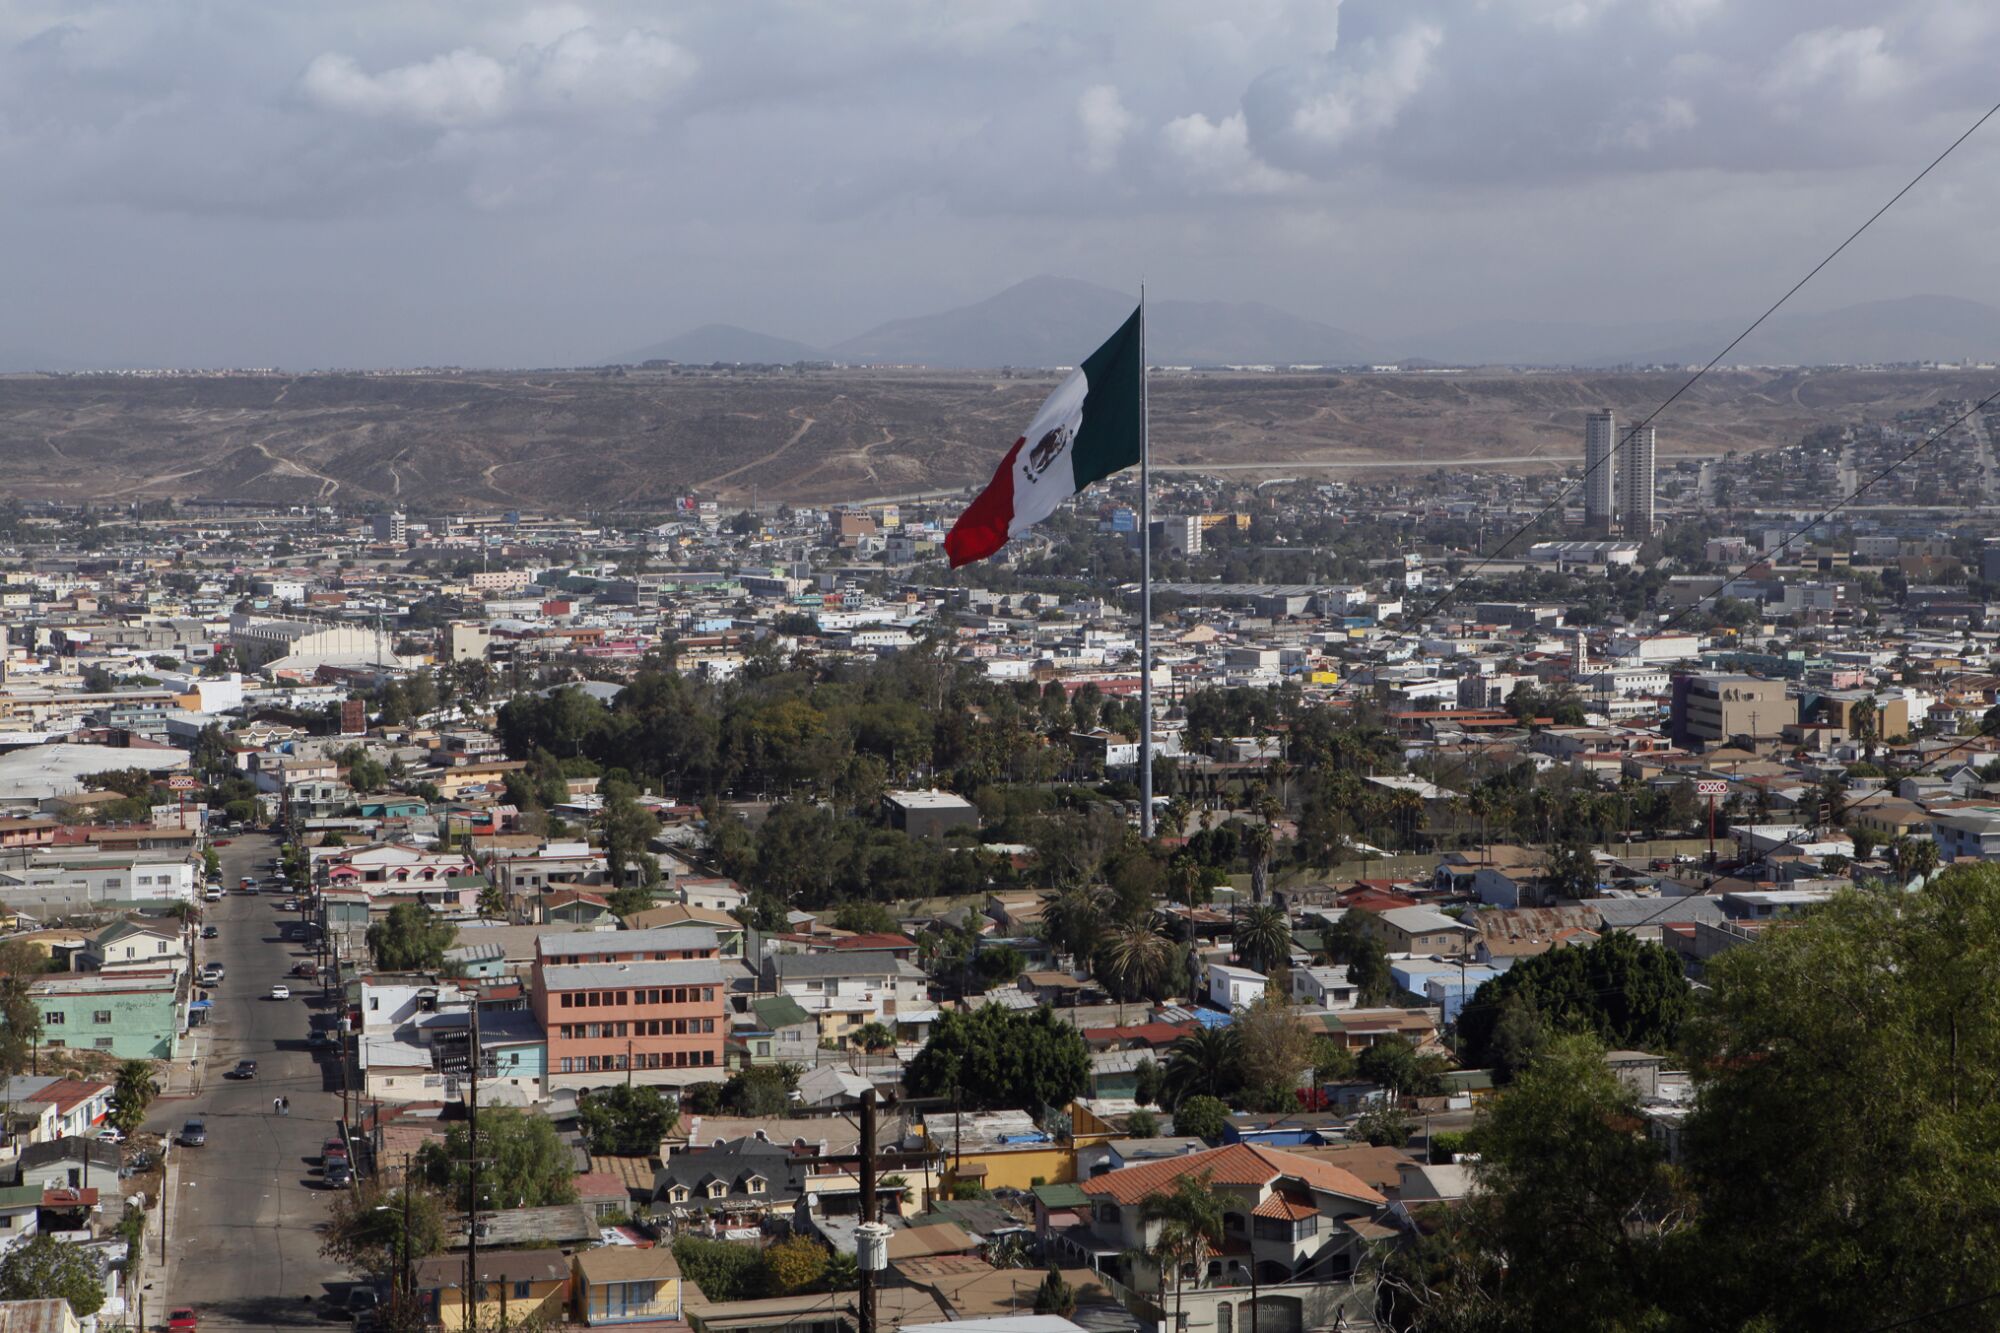 A large Mexican flag flies above downtown Tijuana.